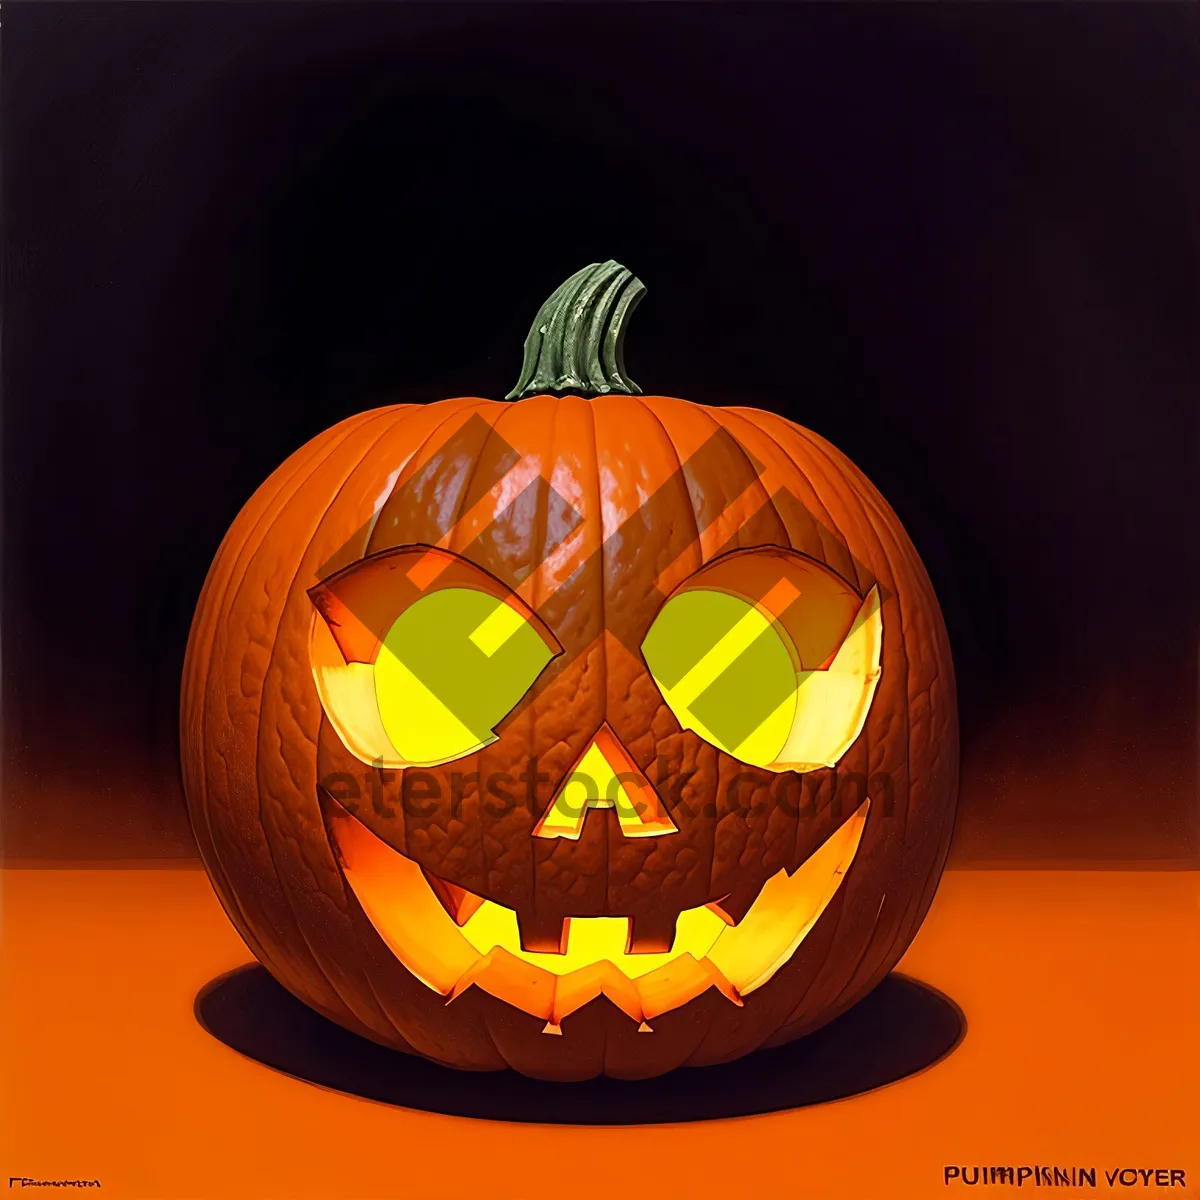 Picture of Spooky Smiling Jack-O'-Lantern Illuminated by Candle